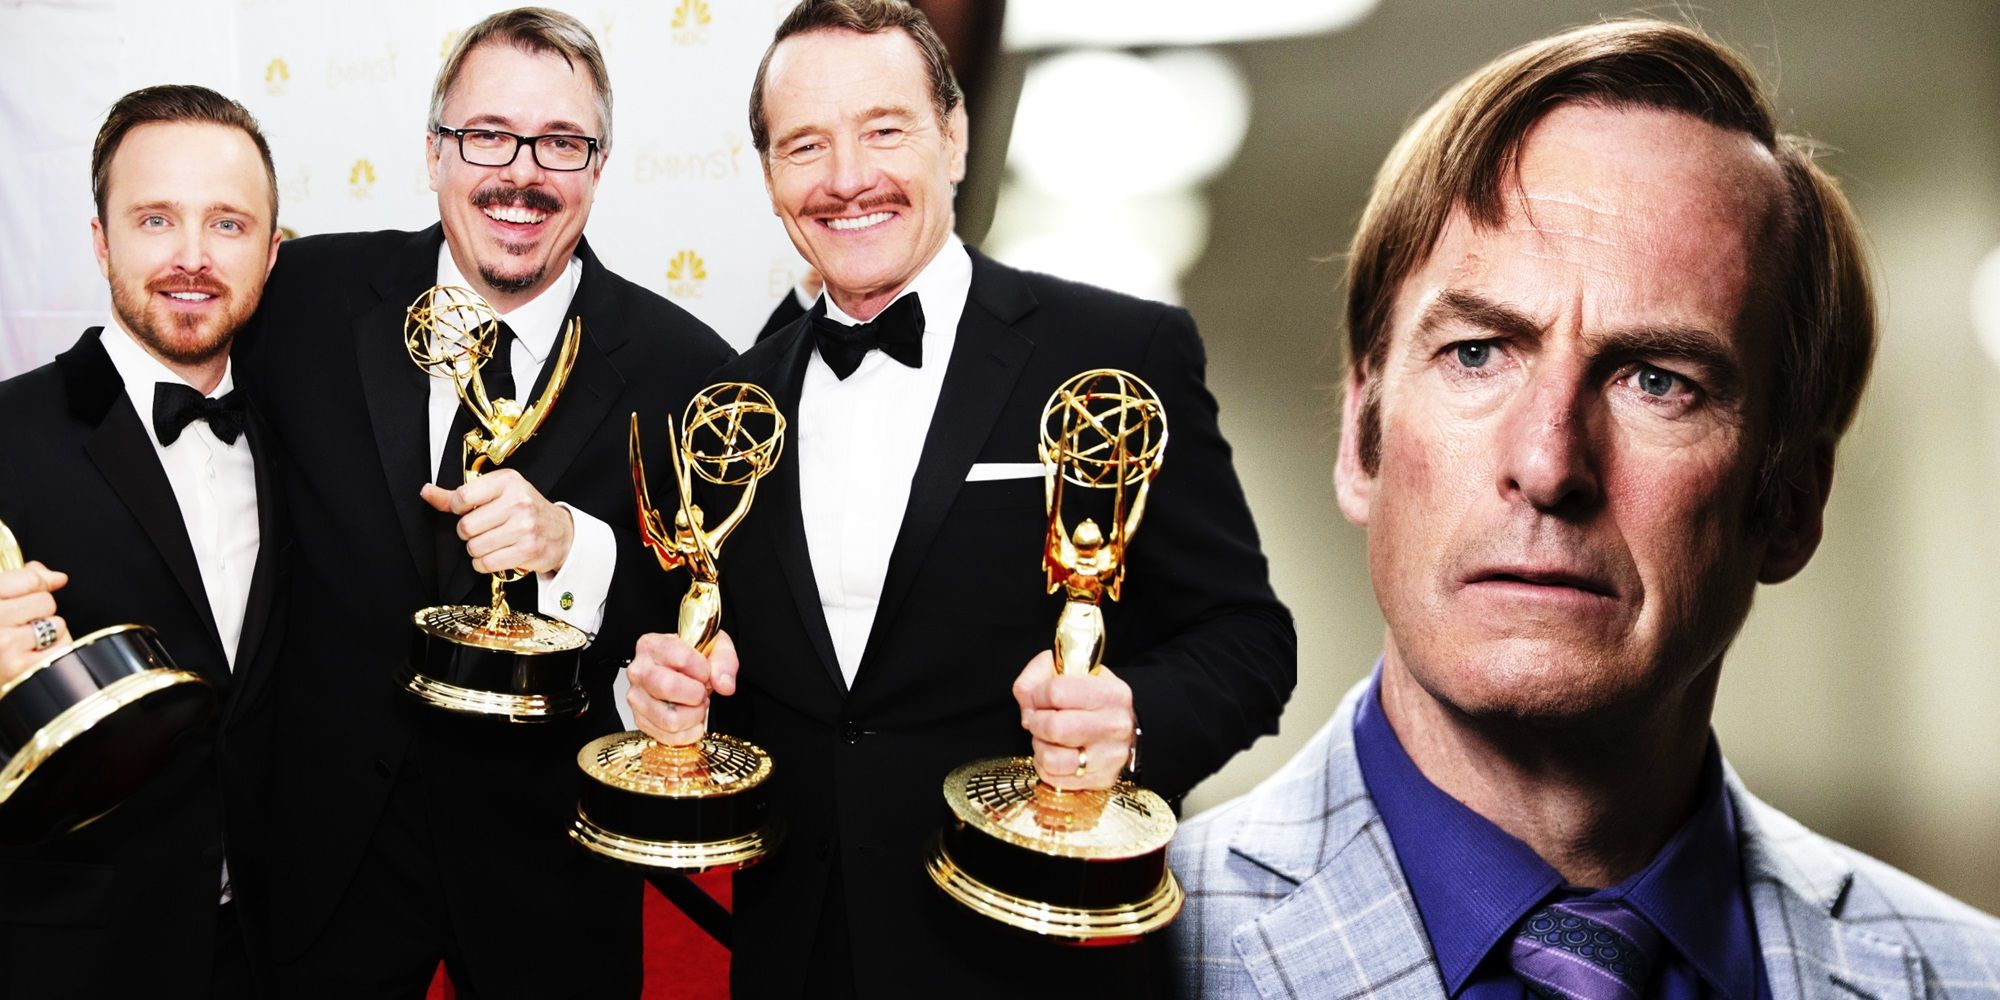 Collage of Aaron Paul, Vince Gilligan, and Bryan Cranston at the Emmys and Bob Odenkirk in Better Call Saul